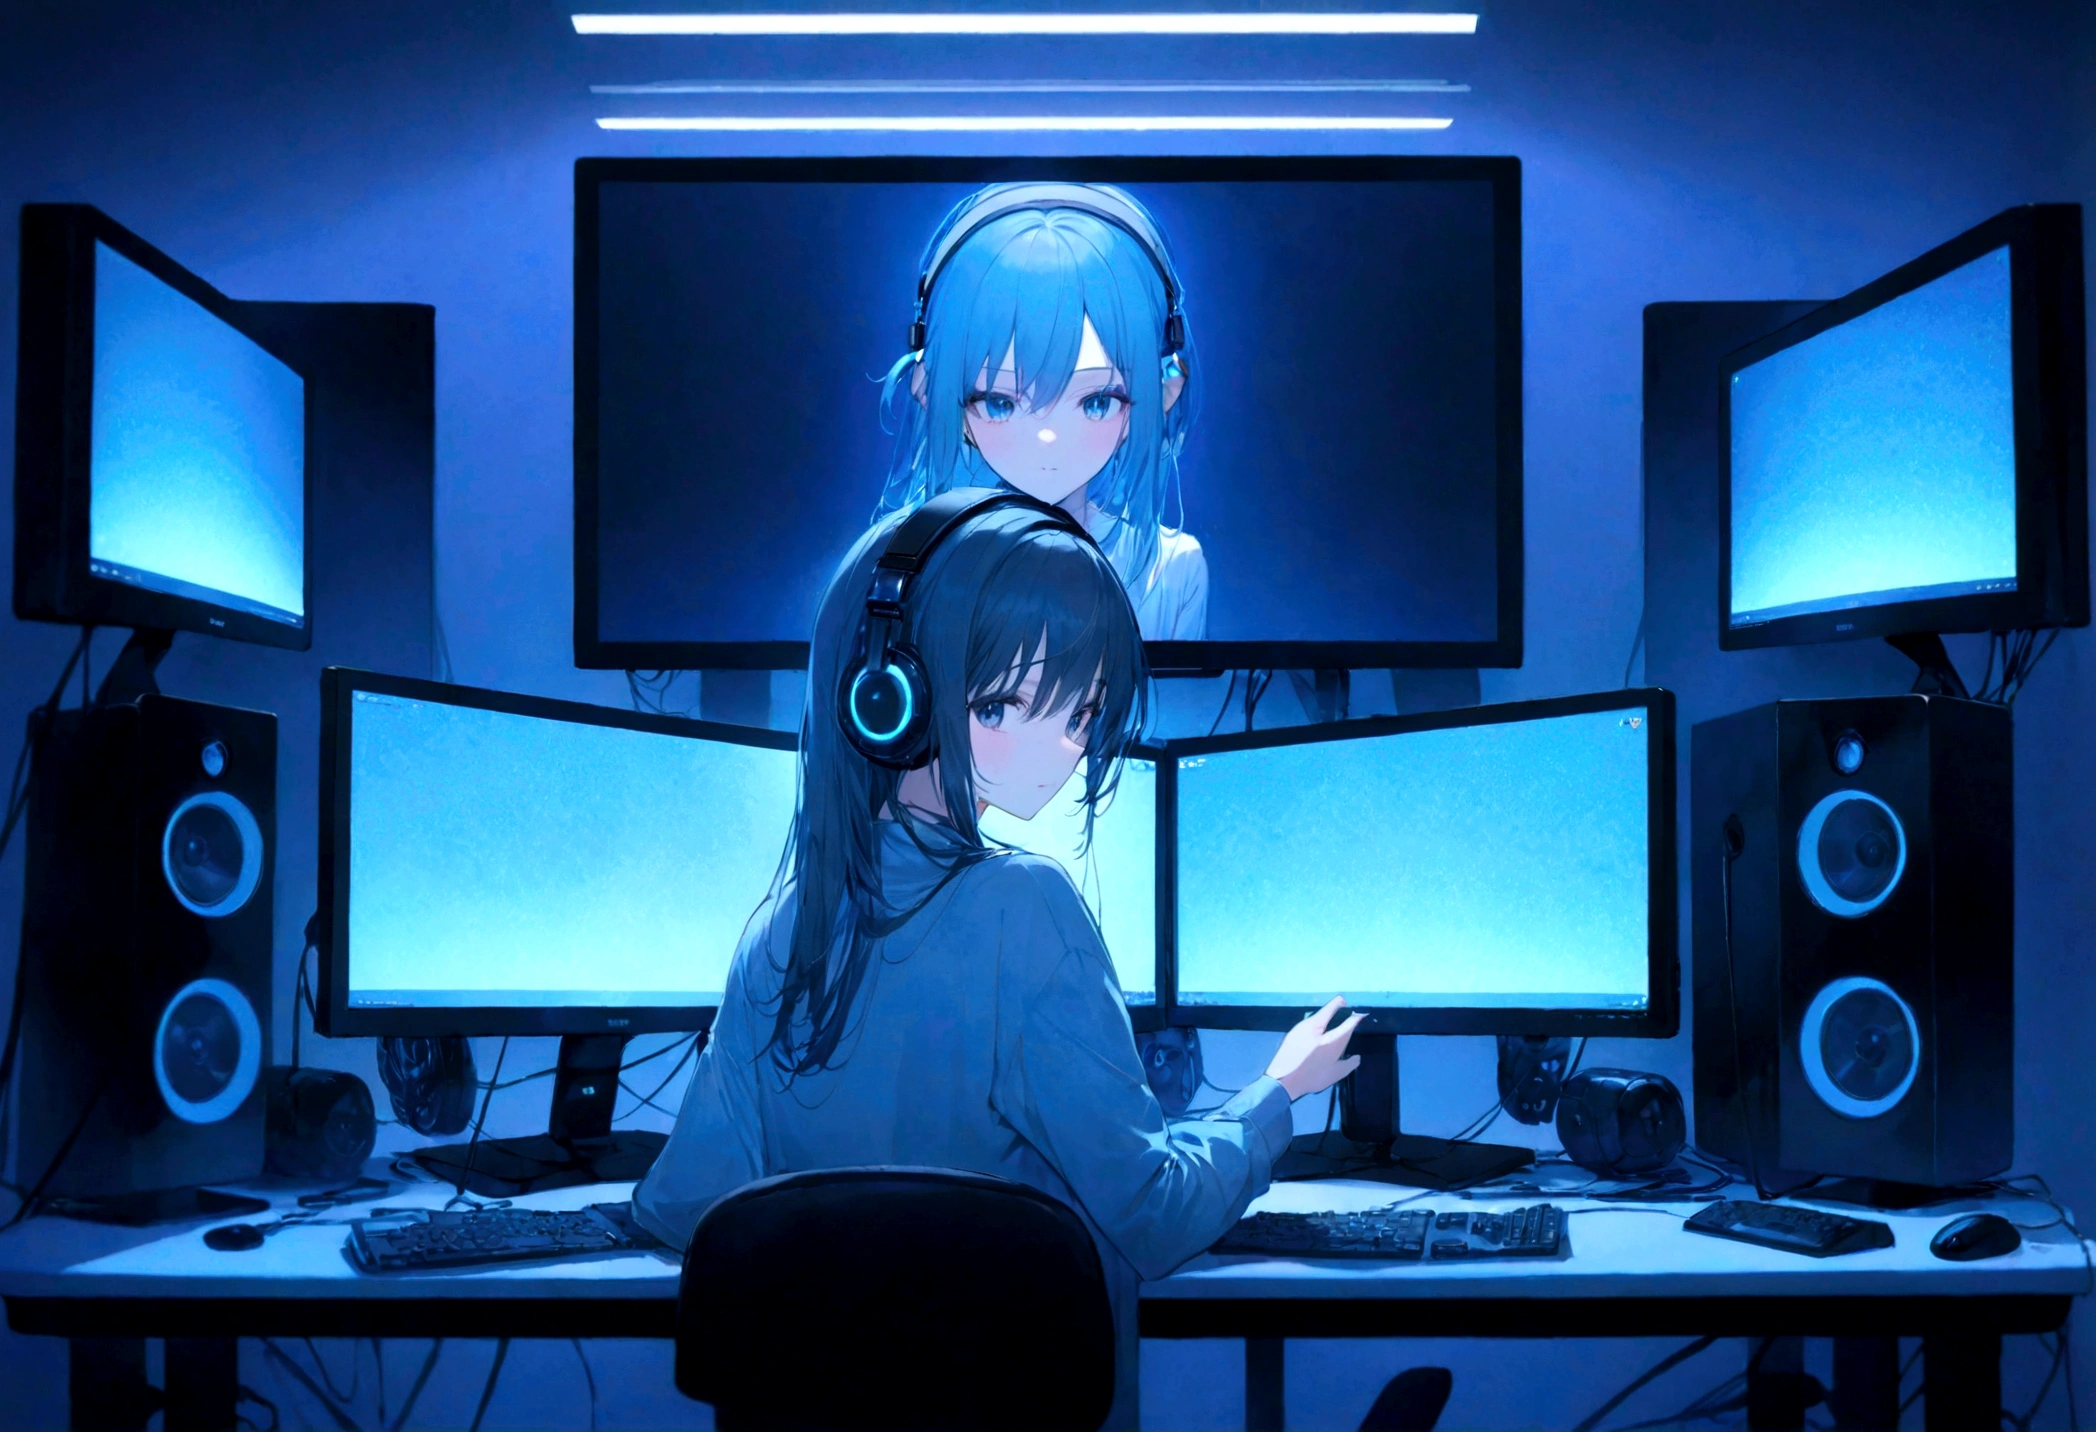 A gaming PC, a room bright with LED lights, a female gamer, a simple and cute room, a beautiful and cute woman using a PC, a woman, ((PC monitors are only 1 horizontal and 1 vertical) ), blue and white theme, the room has white walls and blue LED lights on the four corners of the room, there is a woman from behind in the center of the screen, 8k, super sharp focus, (((For women Screen ratio Raise))), woman looking at a PC from behind in the center, headphones, microphone, neon lights, black lights, masterpiece, top quality, volume lighting, bright and fun atmosphere,